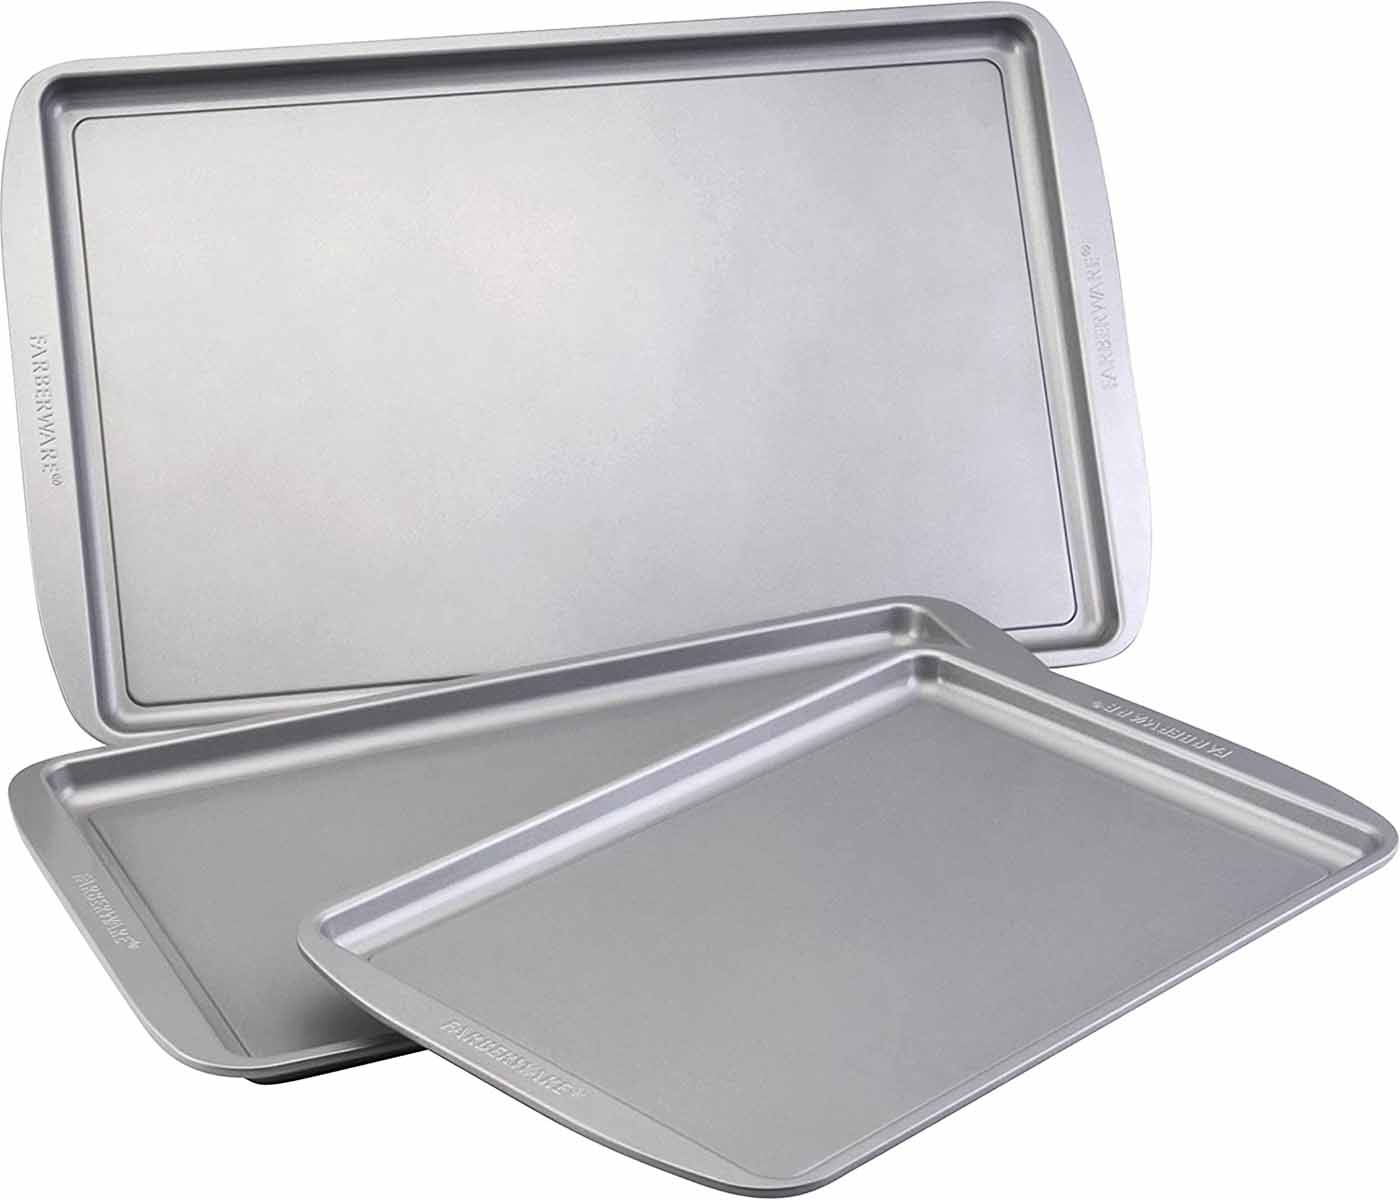 3 Piece Stainless Steel Baking Pan 12 x 10 x 1 inch 